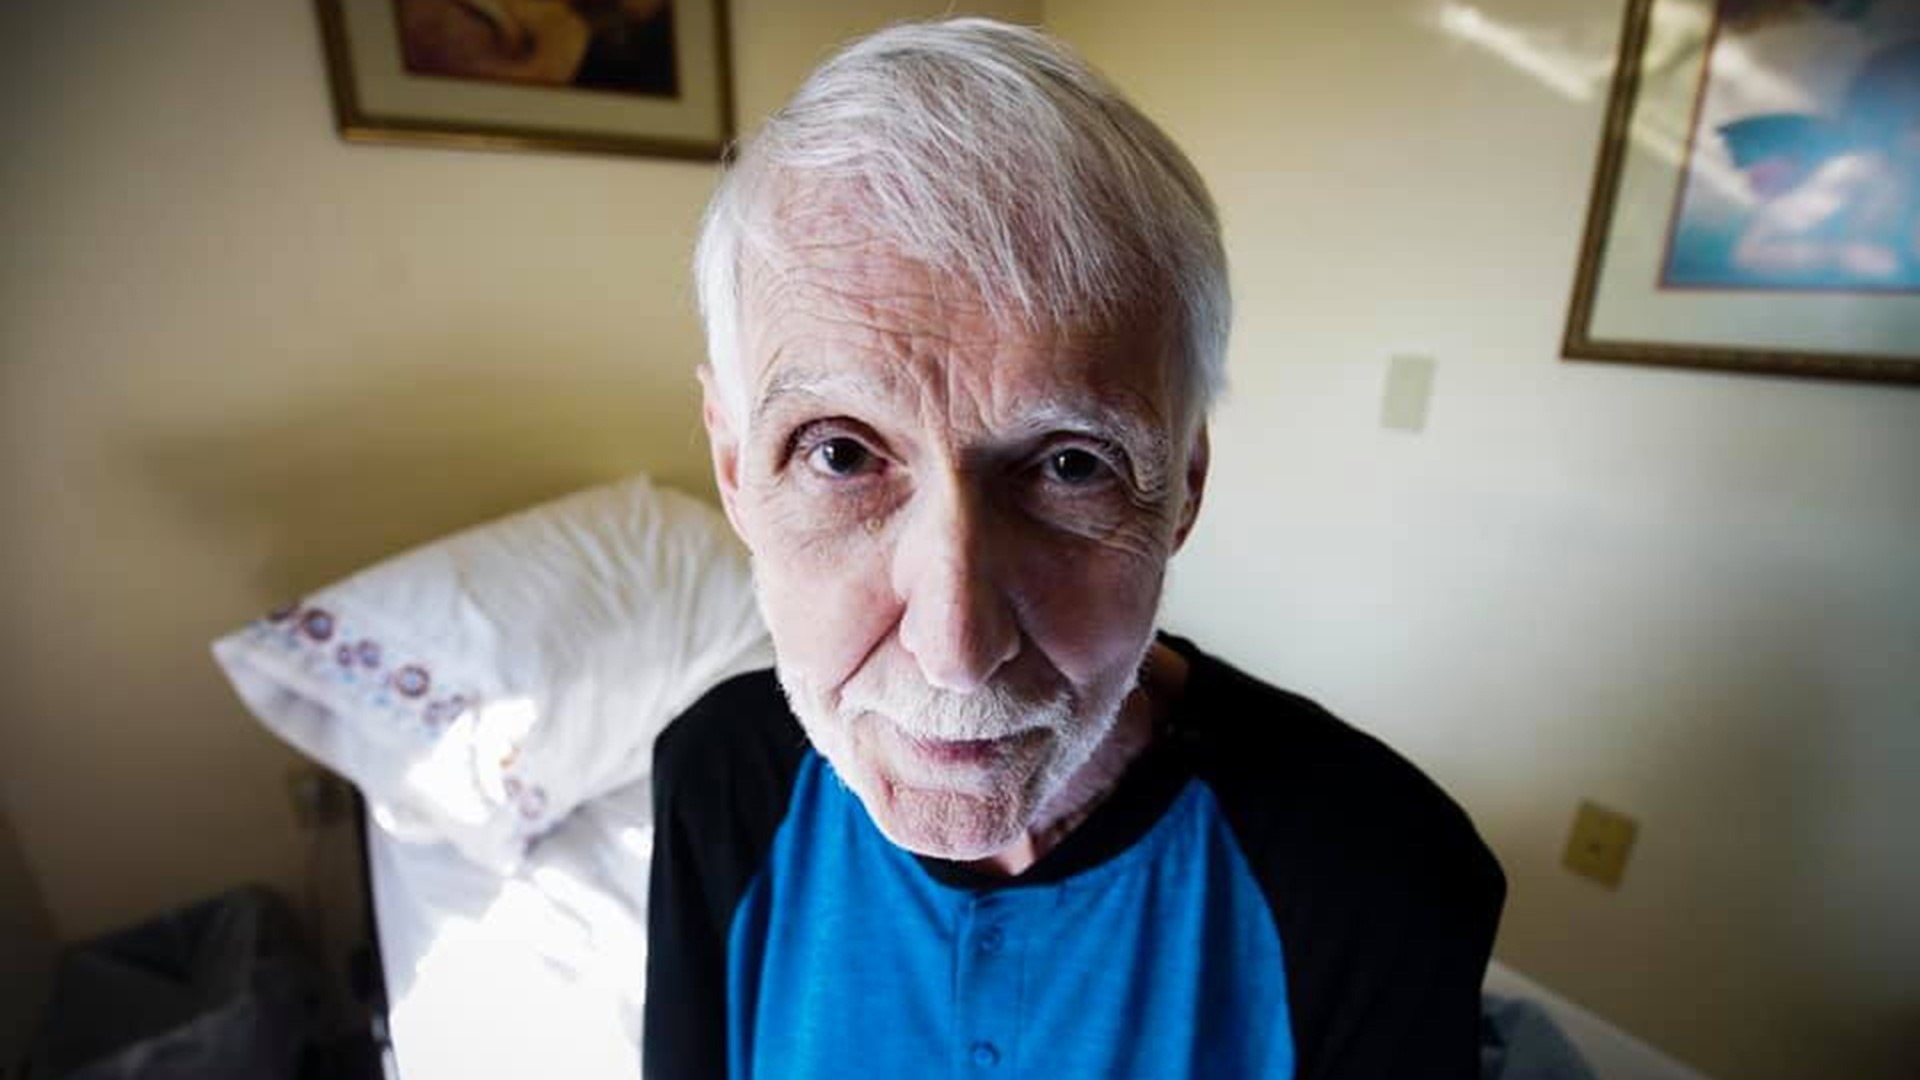 We follow a Seattle man’s decision to die with dignity following a cancer diagnosis.  

Bob Fuller, 75, shares his journey over the last few months of his life.